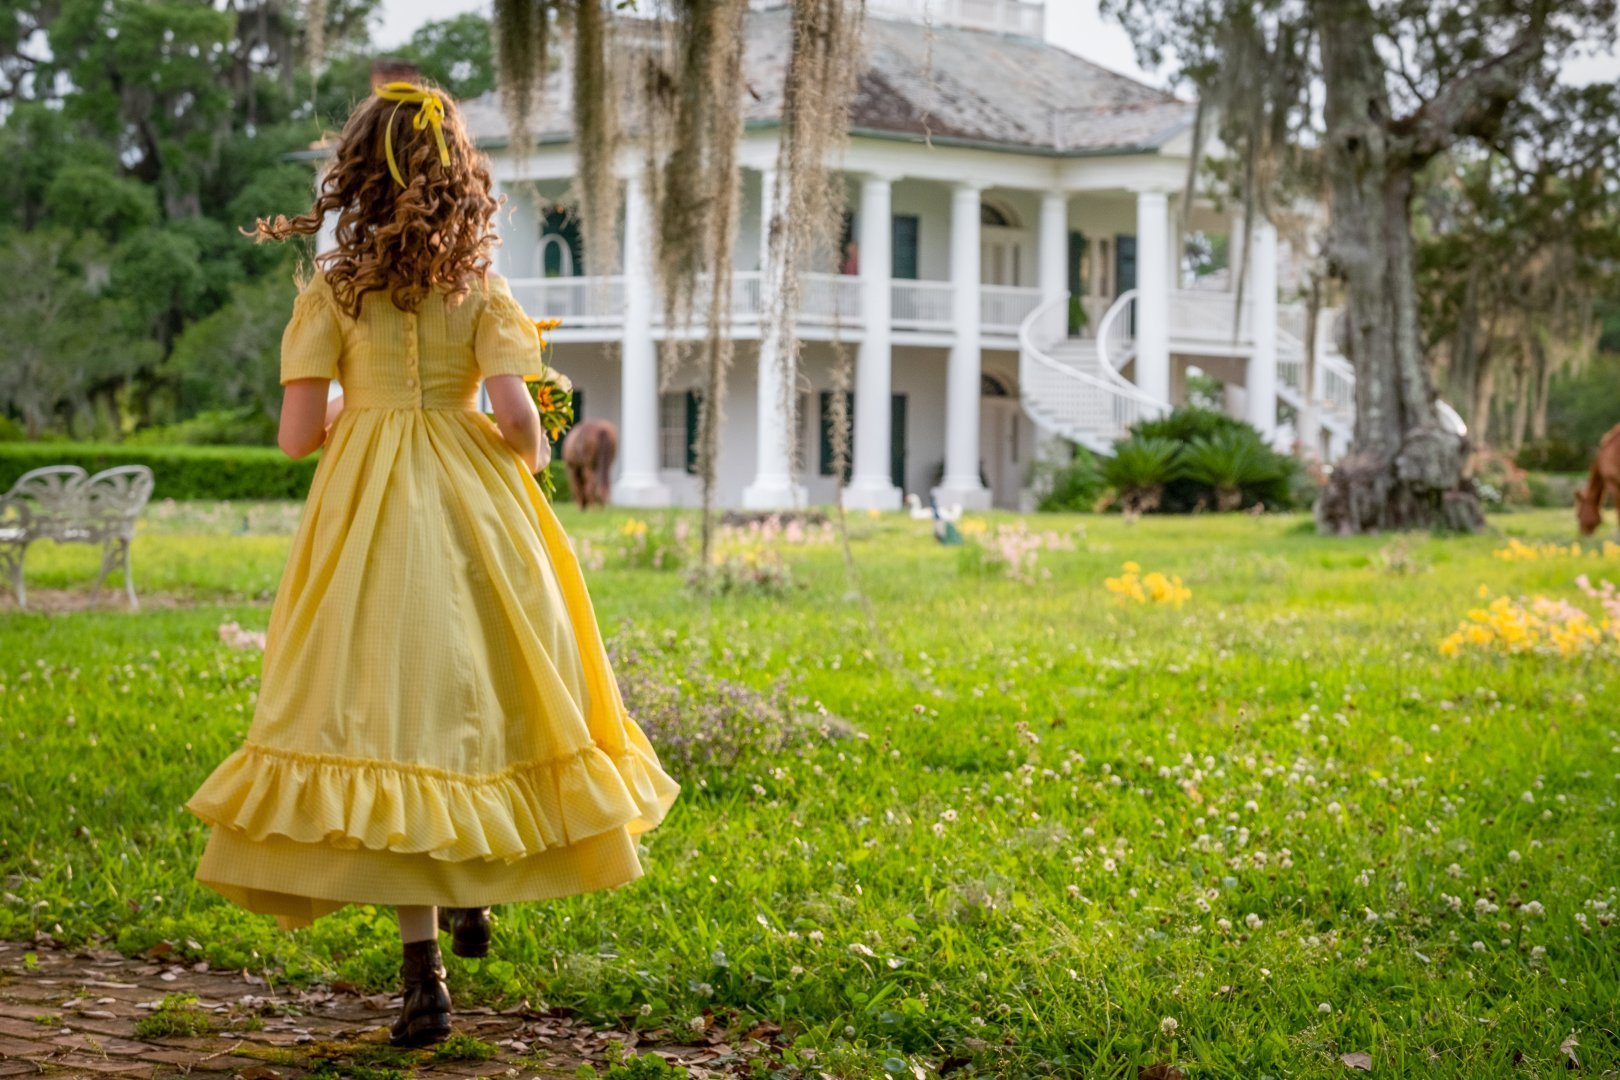 A little girl walks back to her manor in the opening scene of Antebellum.